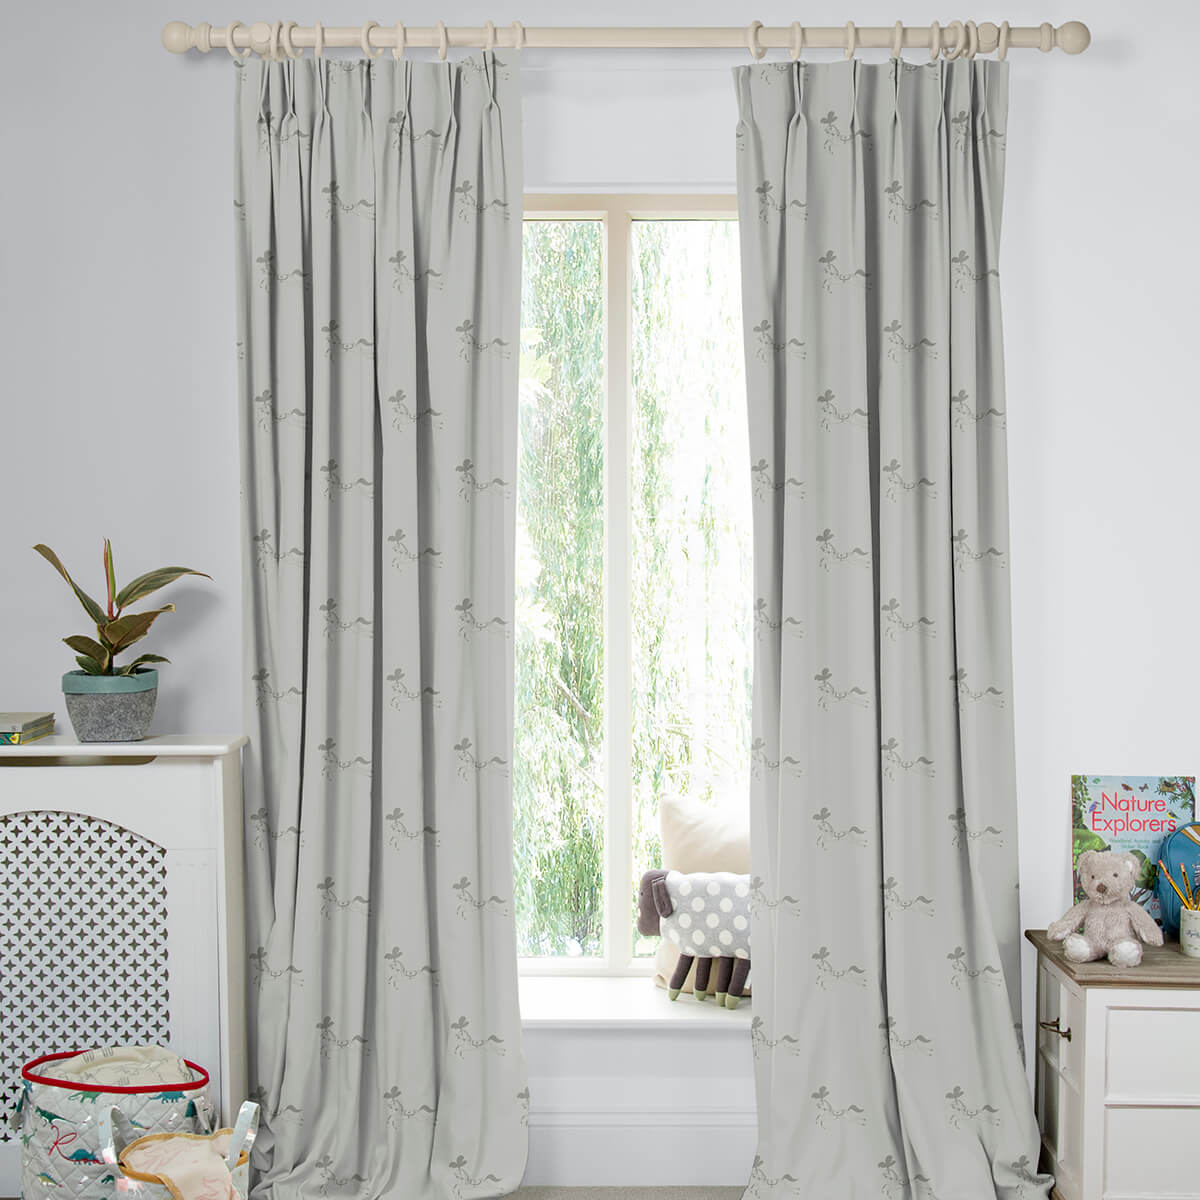 Fairground Ponies Warm Grey Made to Measure Curtains